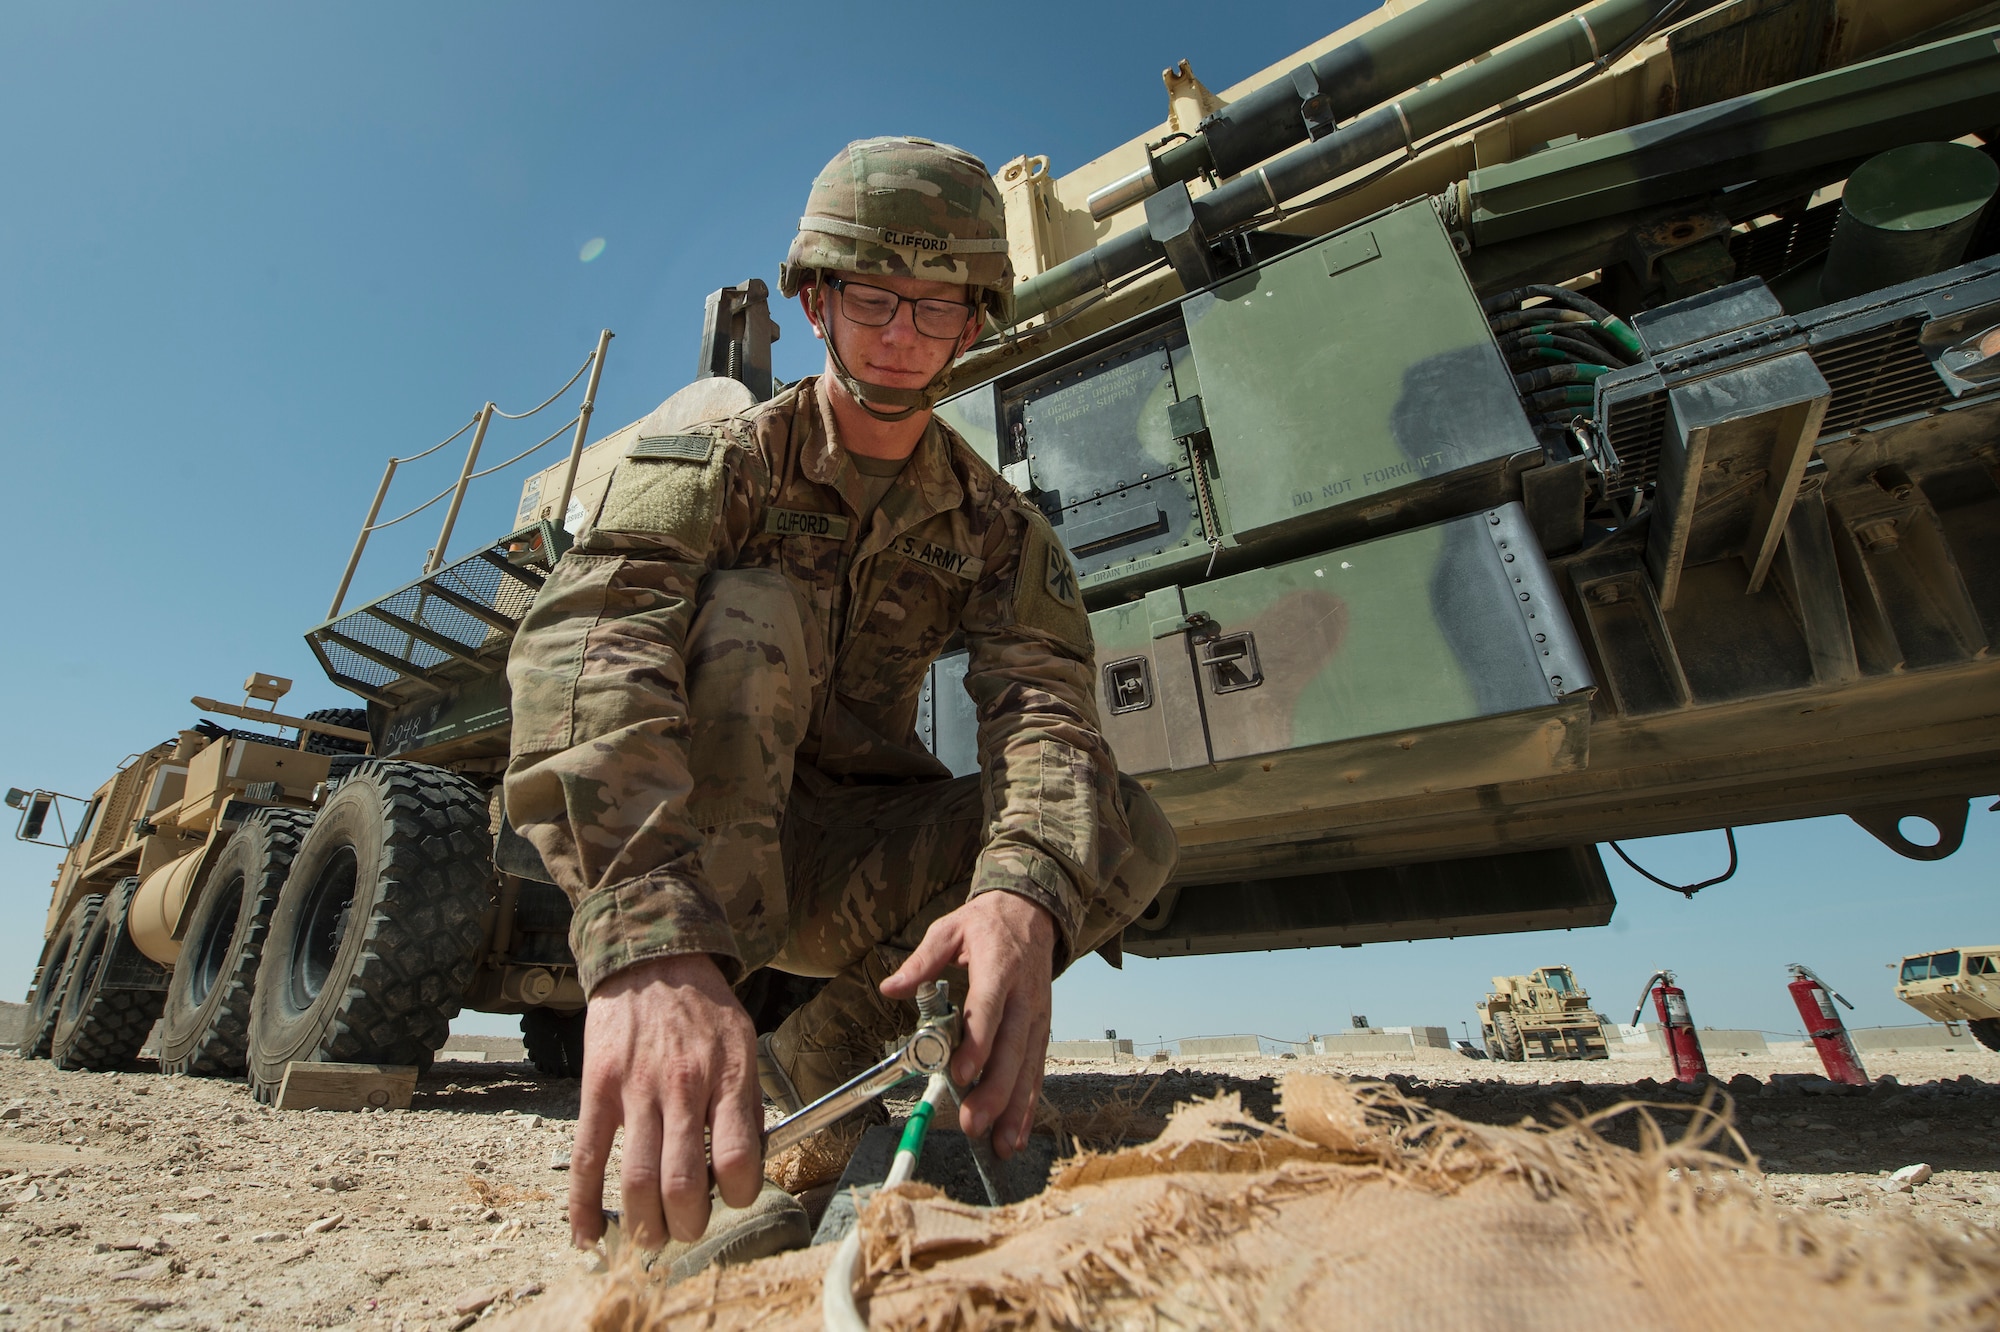 U.S. Army Pvt. Bridger Clifford, Charlie Company, 1st Battalion, 43rd Air Defense Artillery (ADA) Battalion, 11th ADA Brigade patriot missile maintainer and operator, performs patriot missile readiness drills at Al Udeid Air Base, Qatar, April 16, 2019. Soldiers of the 1-43rd ADA Battalion provide the installation with an air defense capability, protecting personnel, assets and operations here from potential air threats. (U.S. Air Force photo by Tech. Sgt. Christopher Hubenthal)